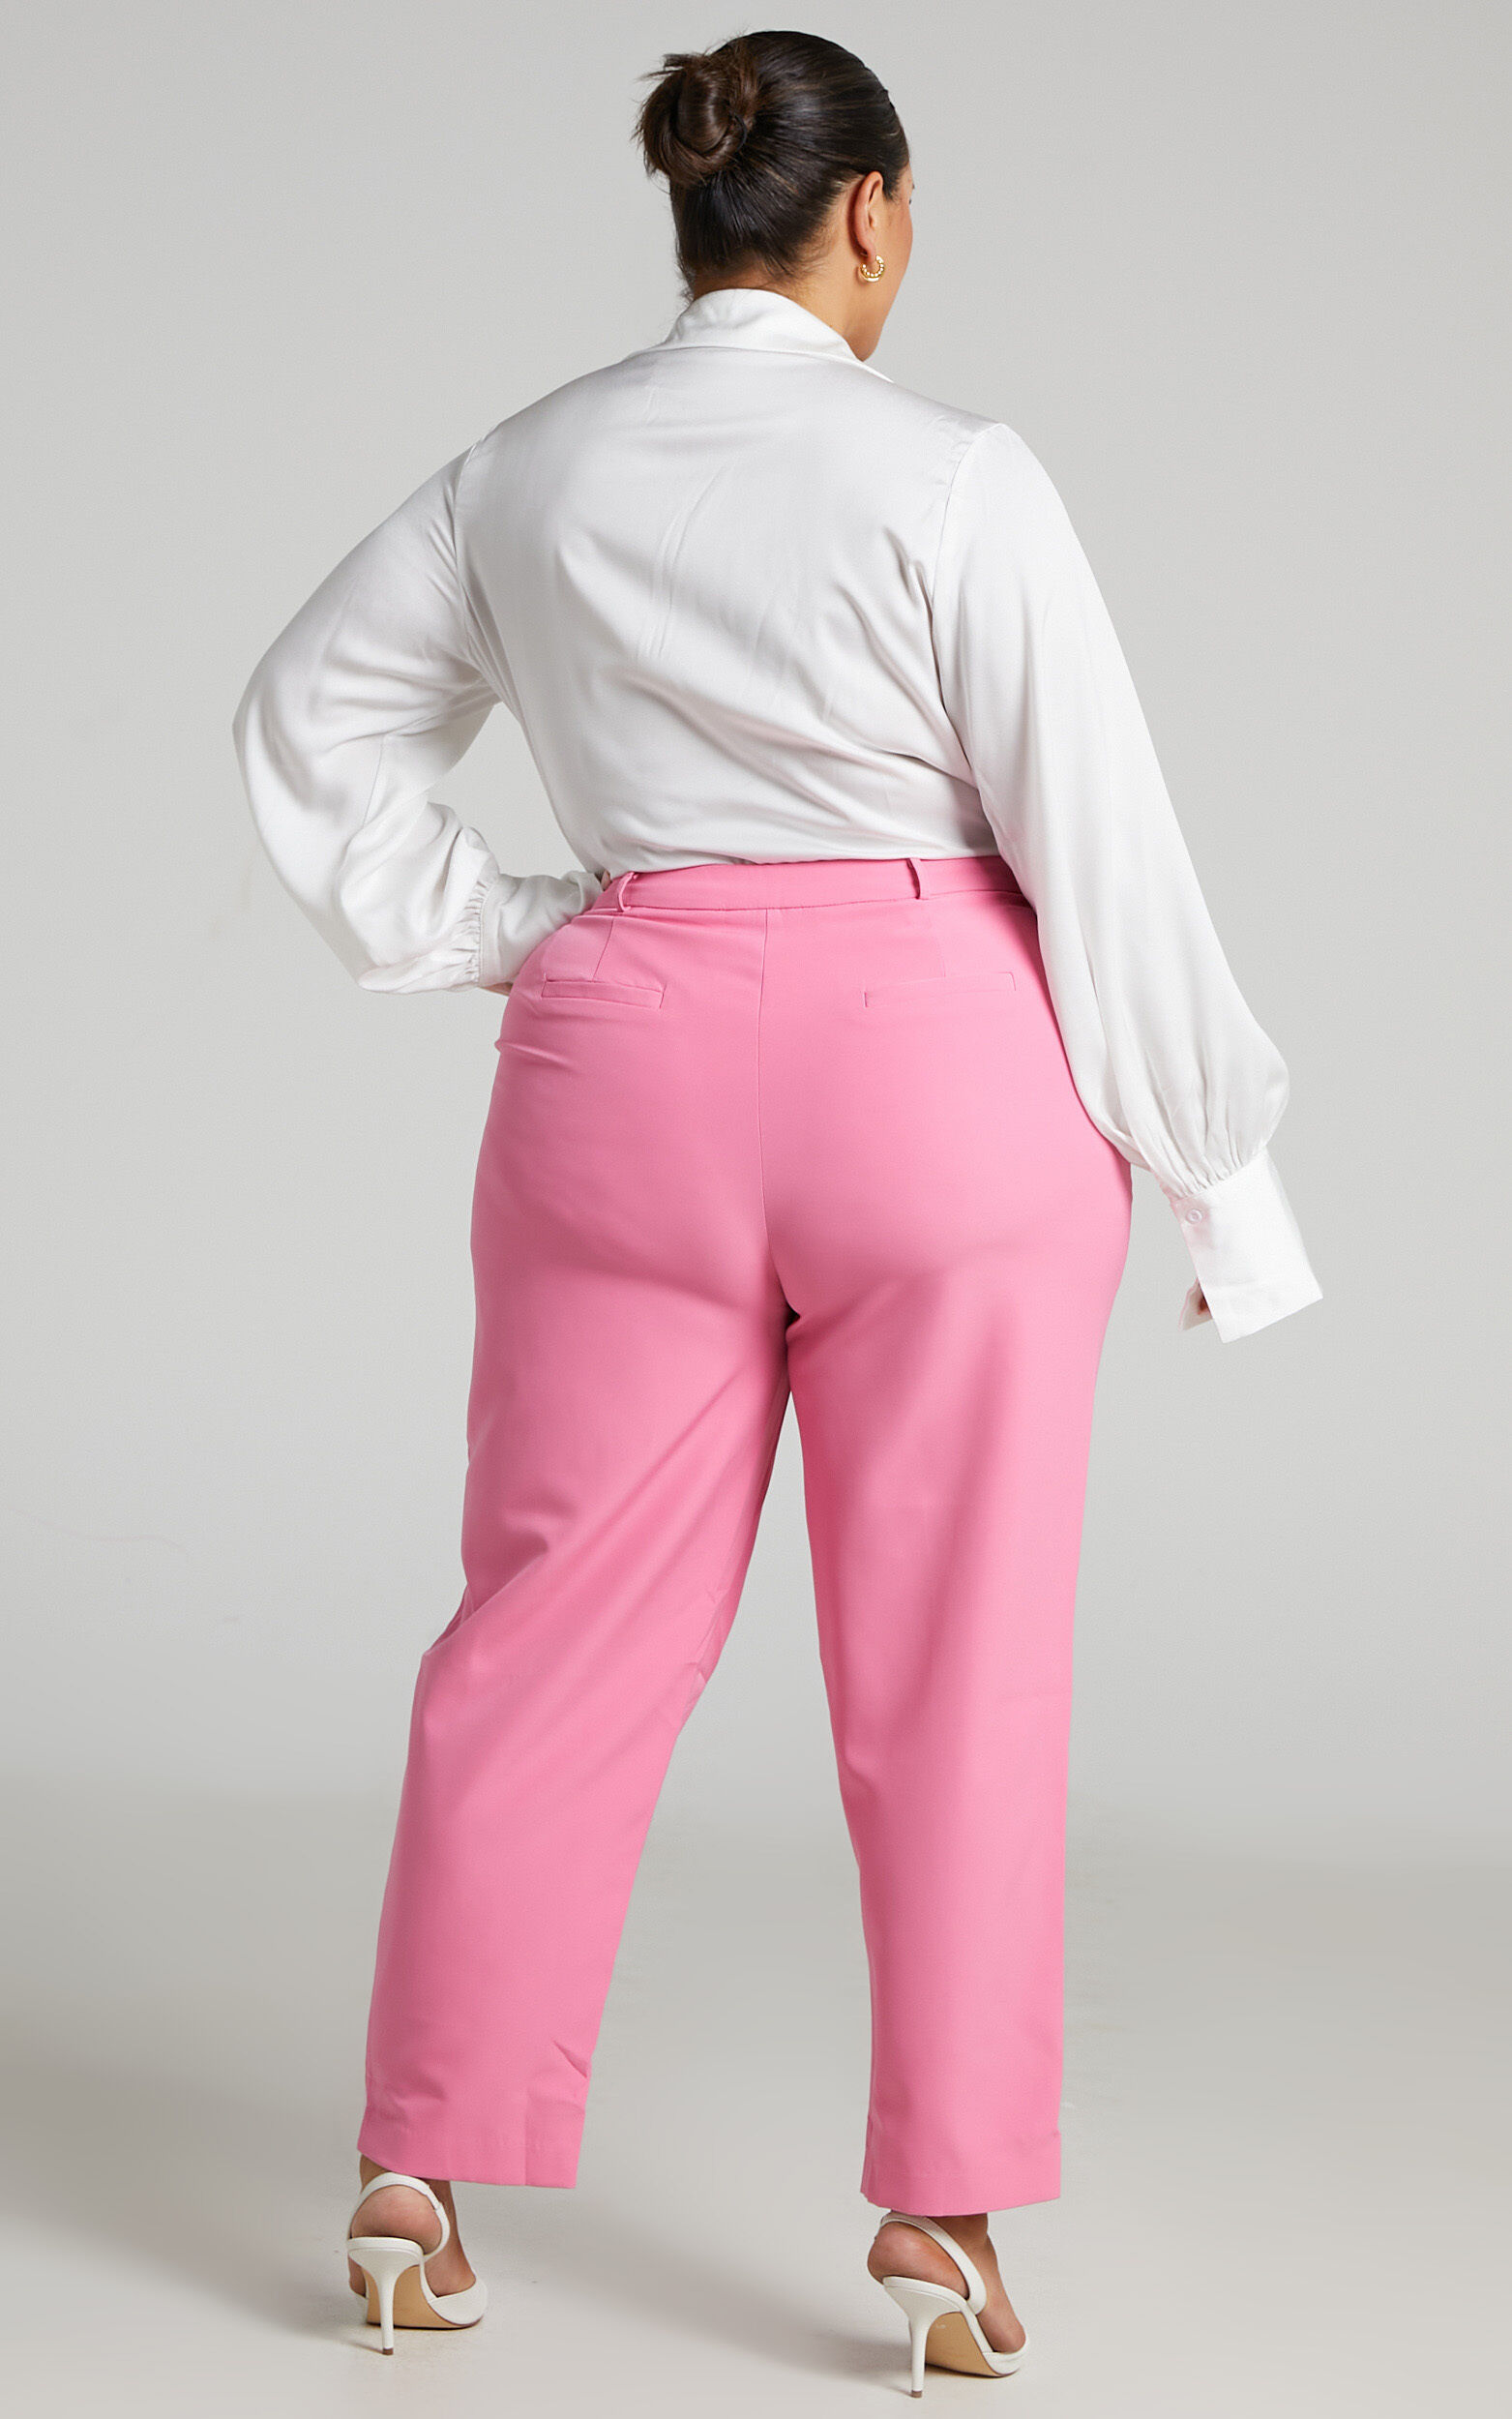 Hermie Pants - High Waisted Cropped Tailored Pants in Pink